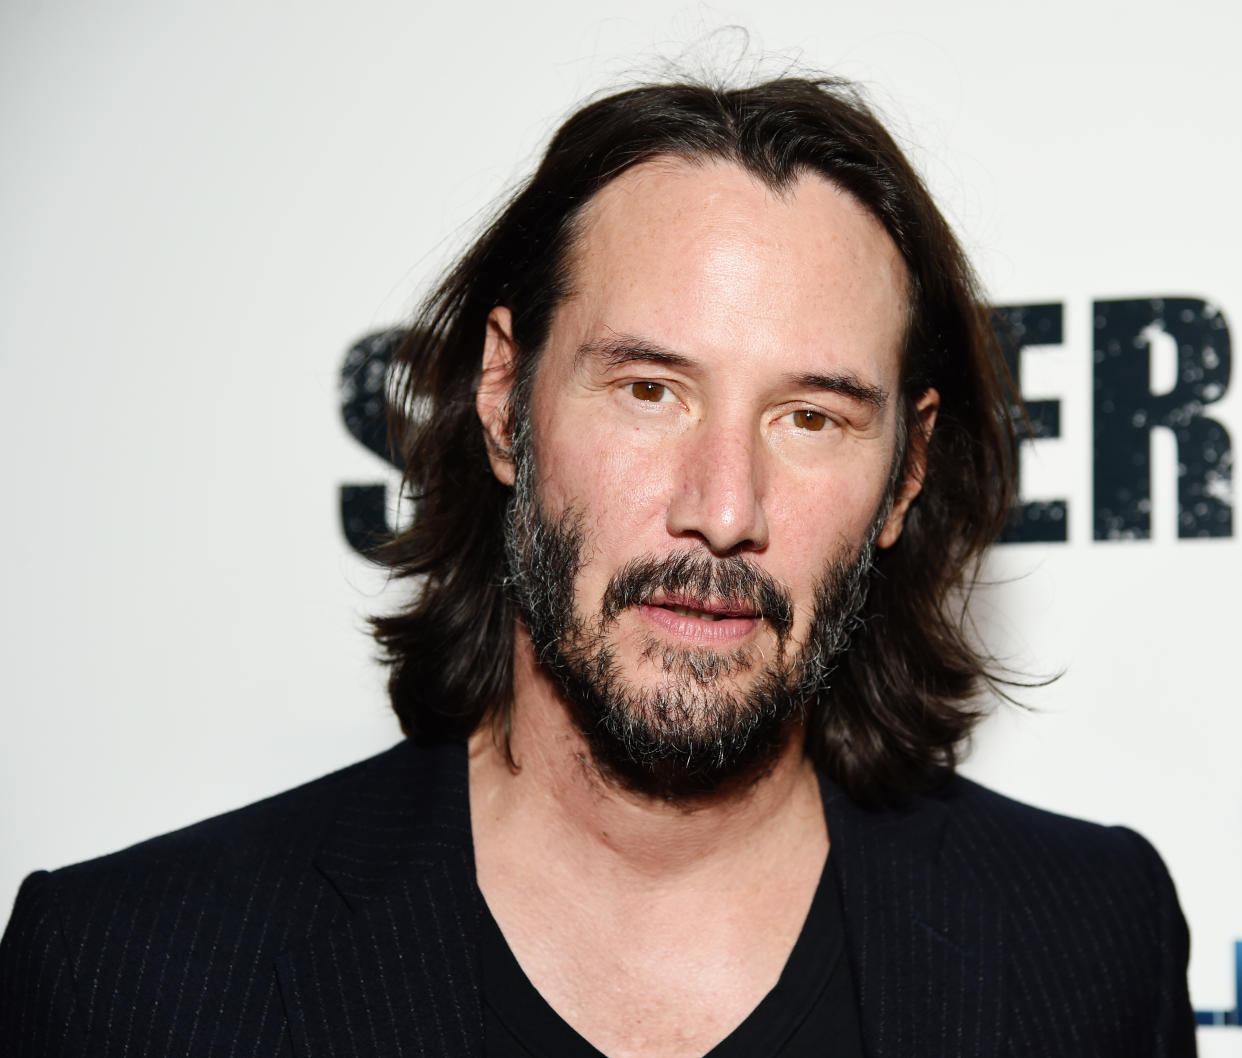 LOS ANGELES, CALIFORNIA - SEPTEMBER 24: Keanu Reeves attends Los Angeles Special Screening of "Semper Fi" on September 24, 2019 in Los Angeles, California. (Photo by Michael Kovac/Getty Images for Lionsgate)